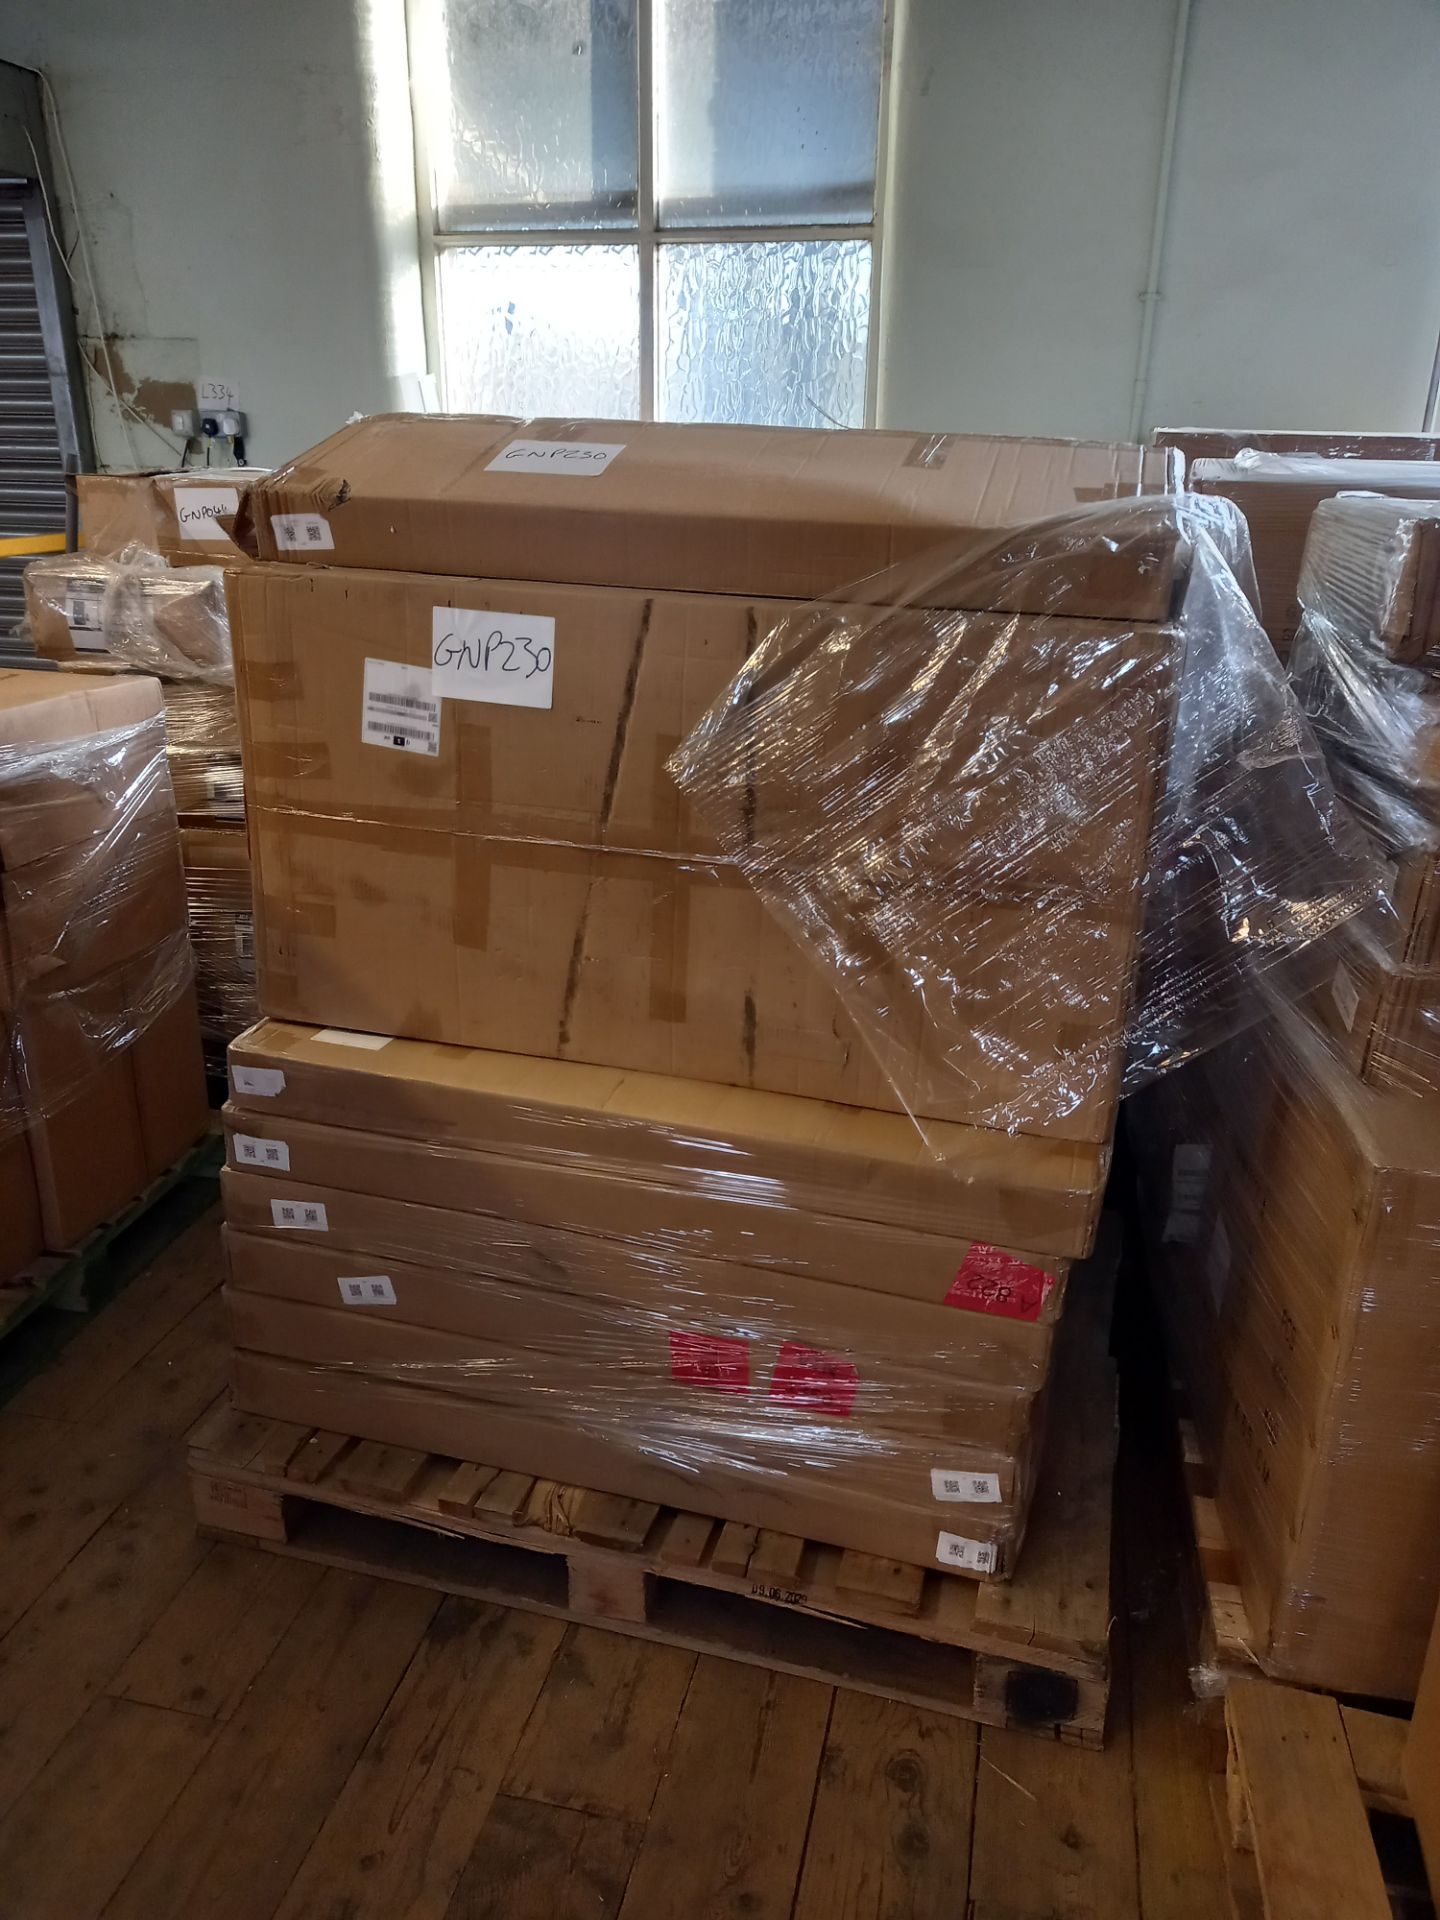 (GNP230) PALLET OF 20 X NEW DESKS AND 1 X SMALL TROLLEY